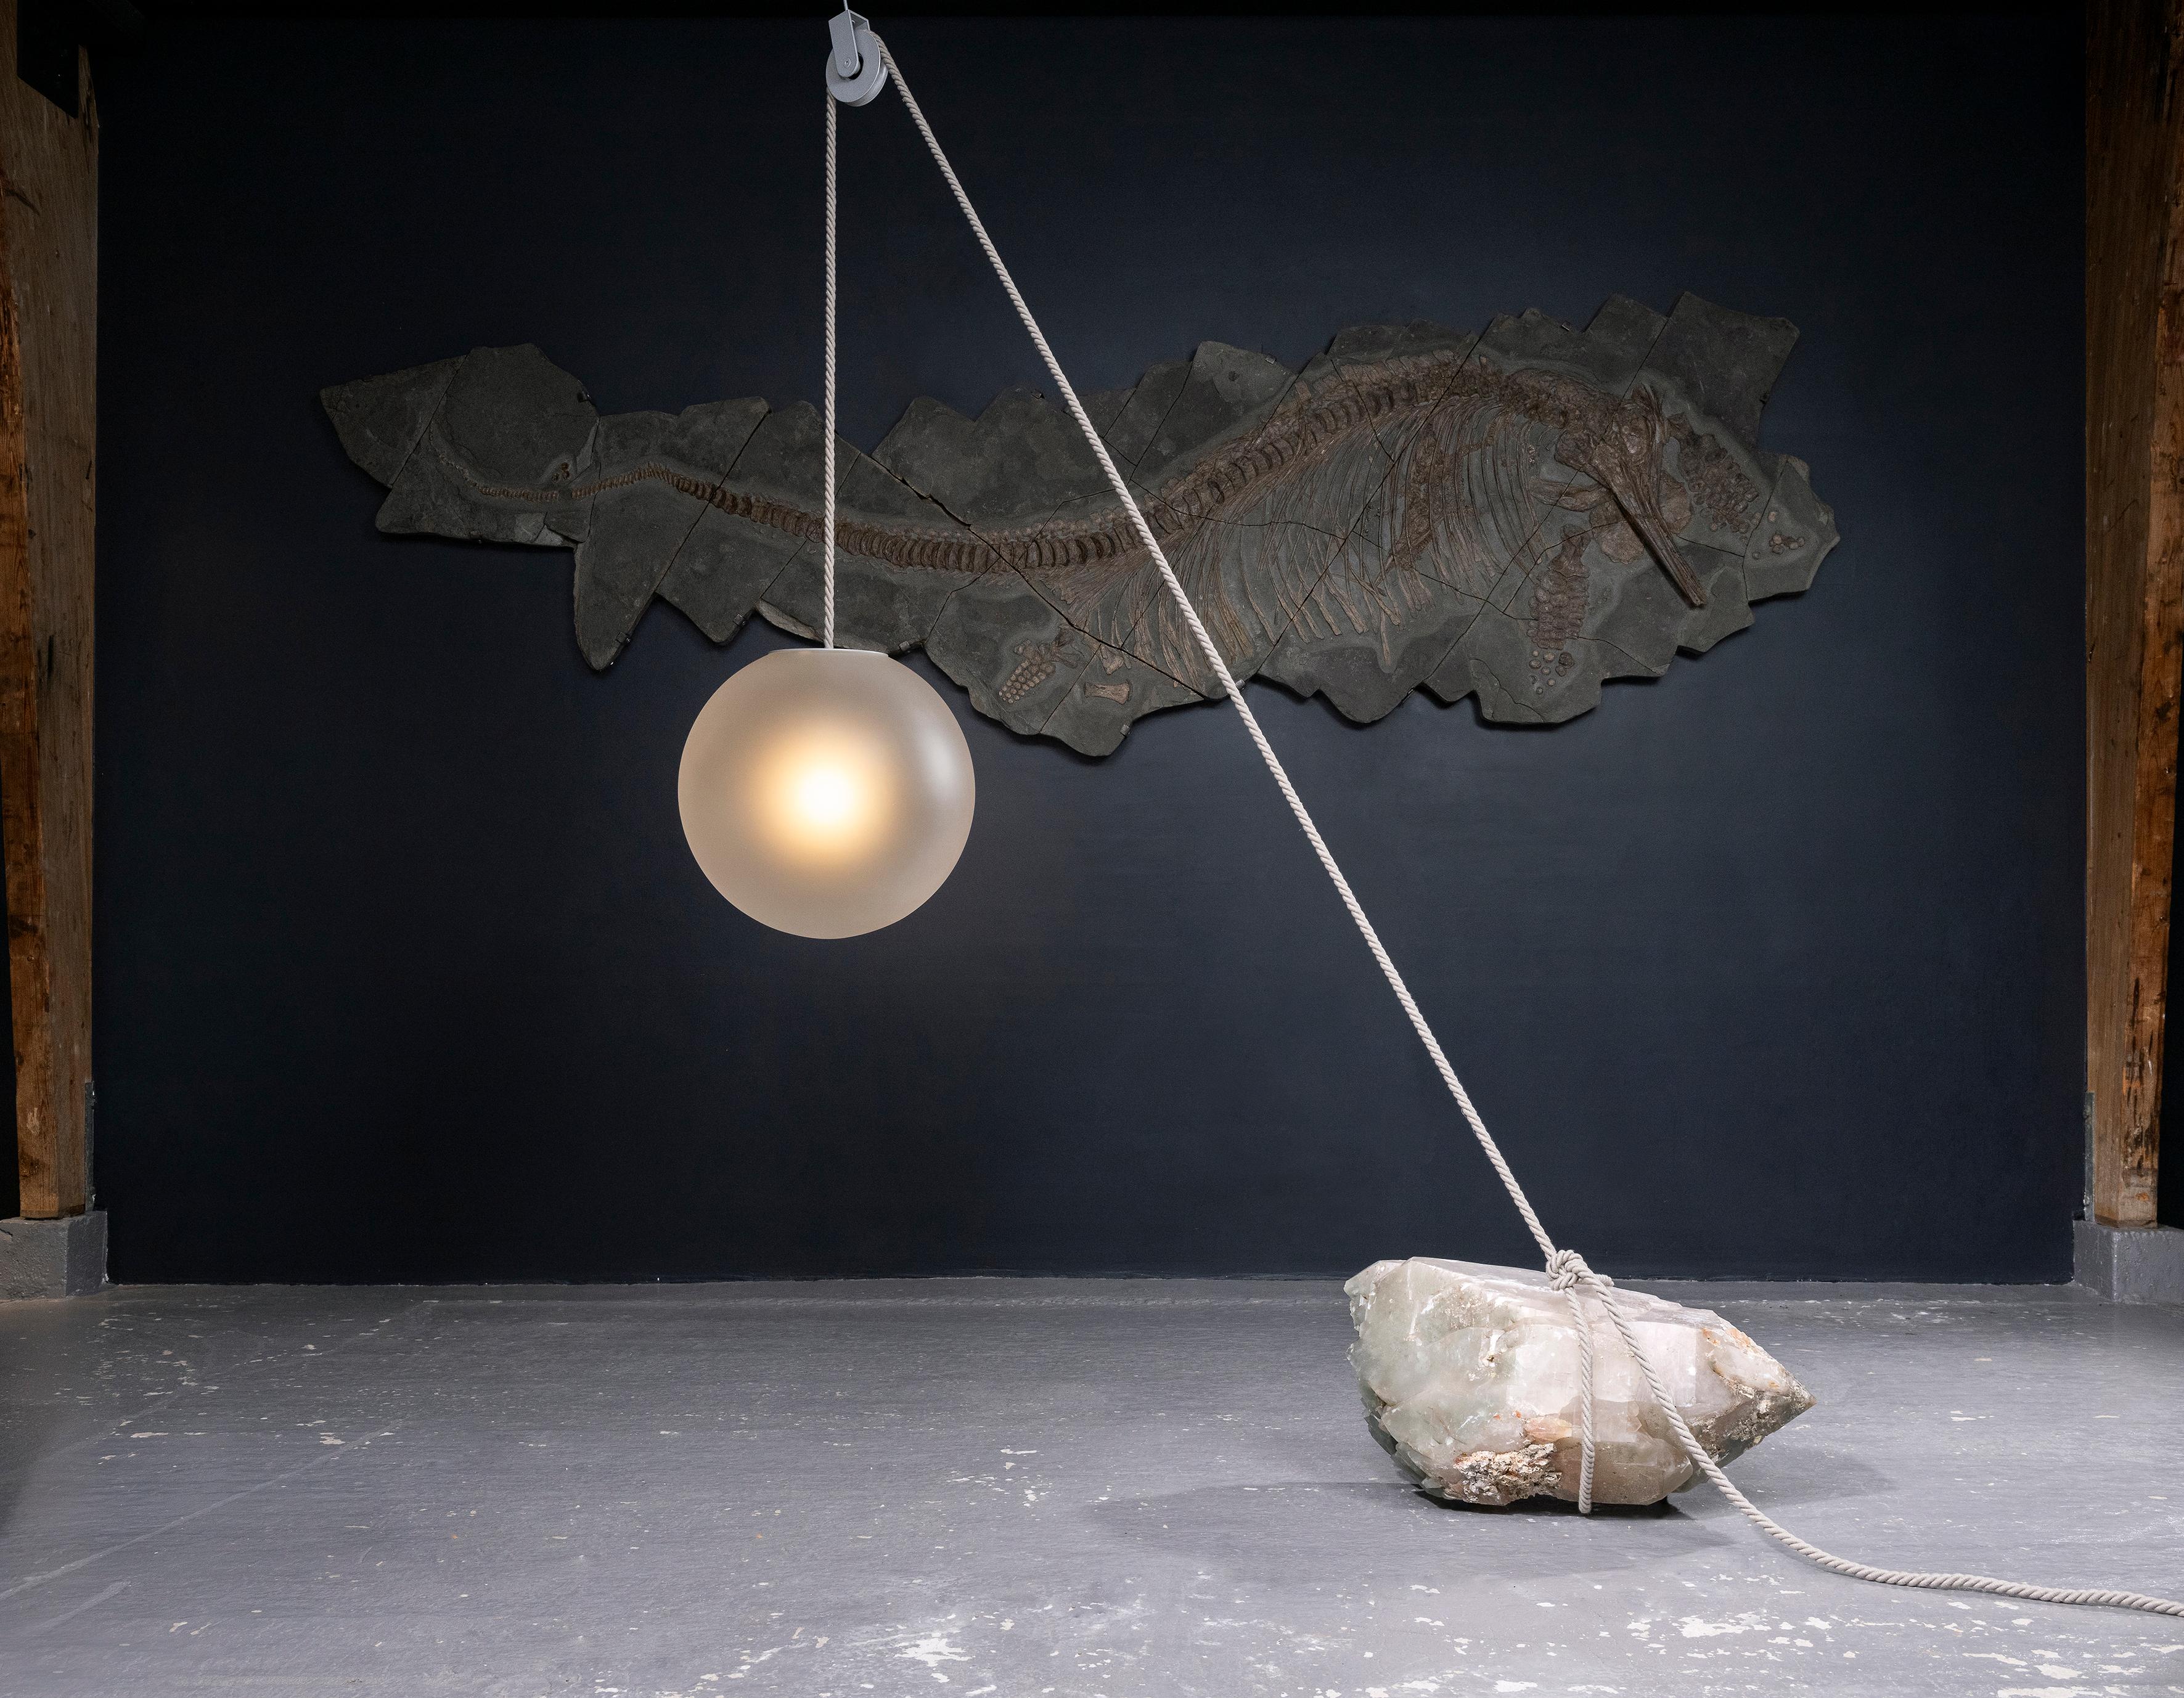 “Beacon of Light” is a design object and a functional sculpture. It gives light of hope to the lost traveller. A luminous sphere attached to a natural stone creates a delicate balance, a fulcrum in the world of confusion and uncertainty. Each stone